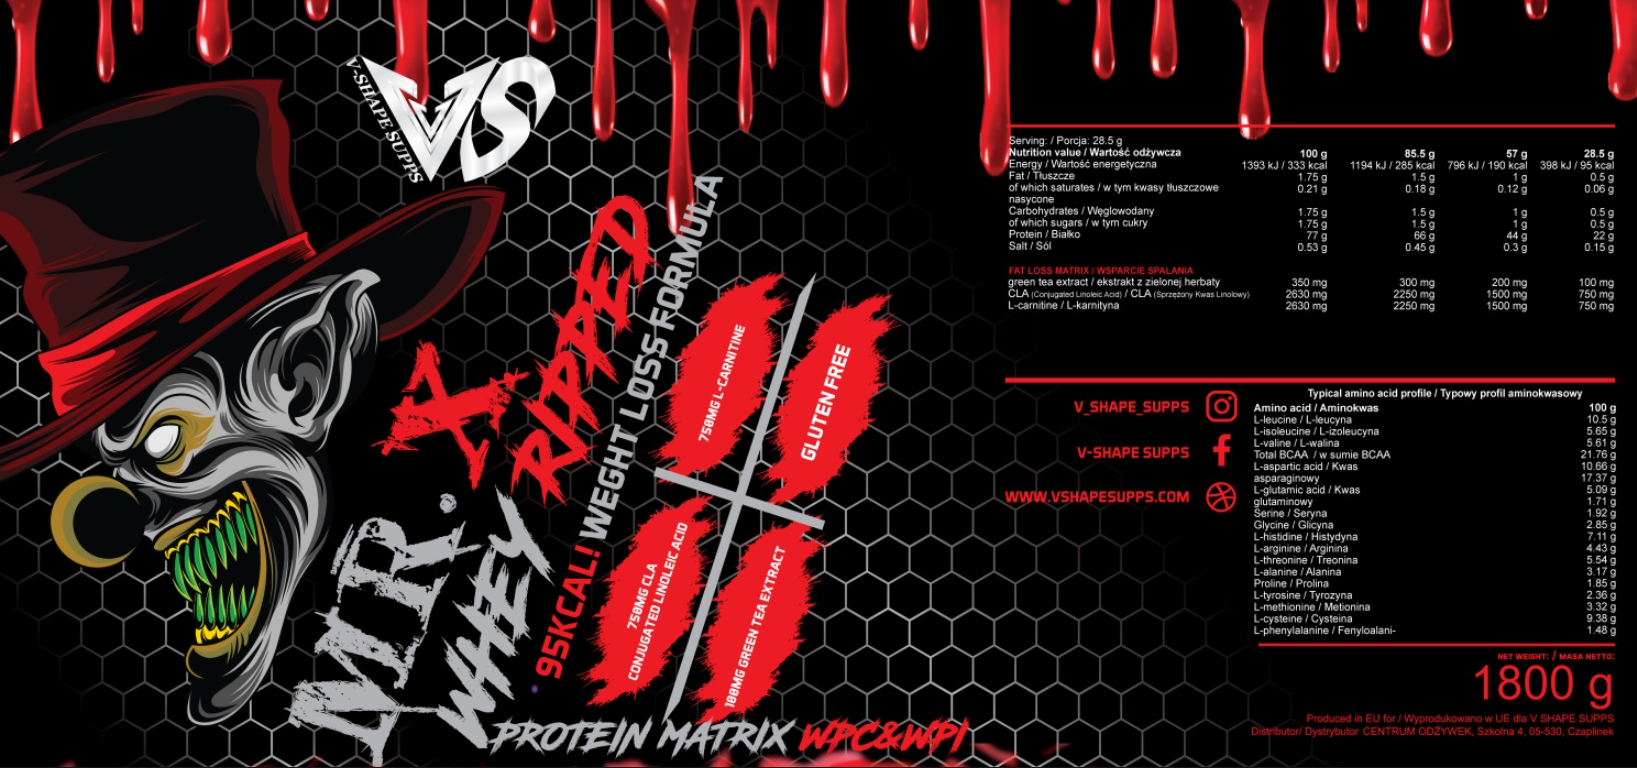 V-SHAPE SUPPS MR X WHEY RIPPED-factsheets